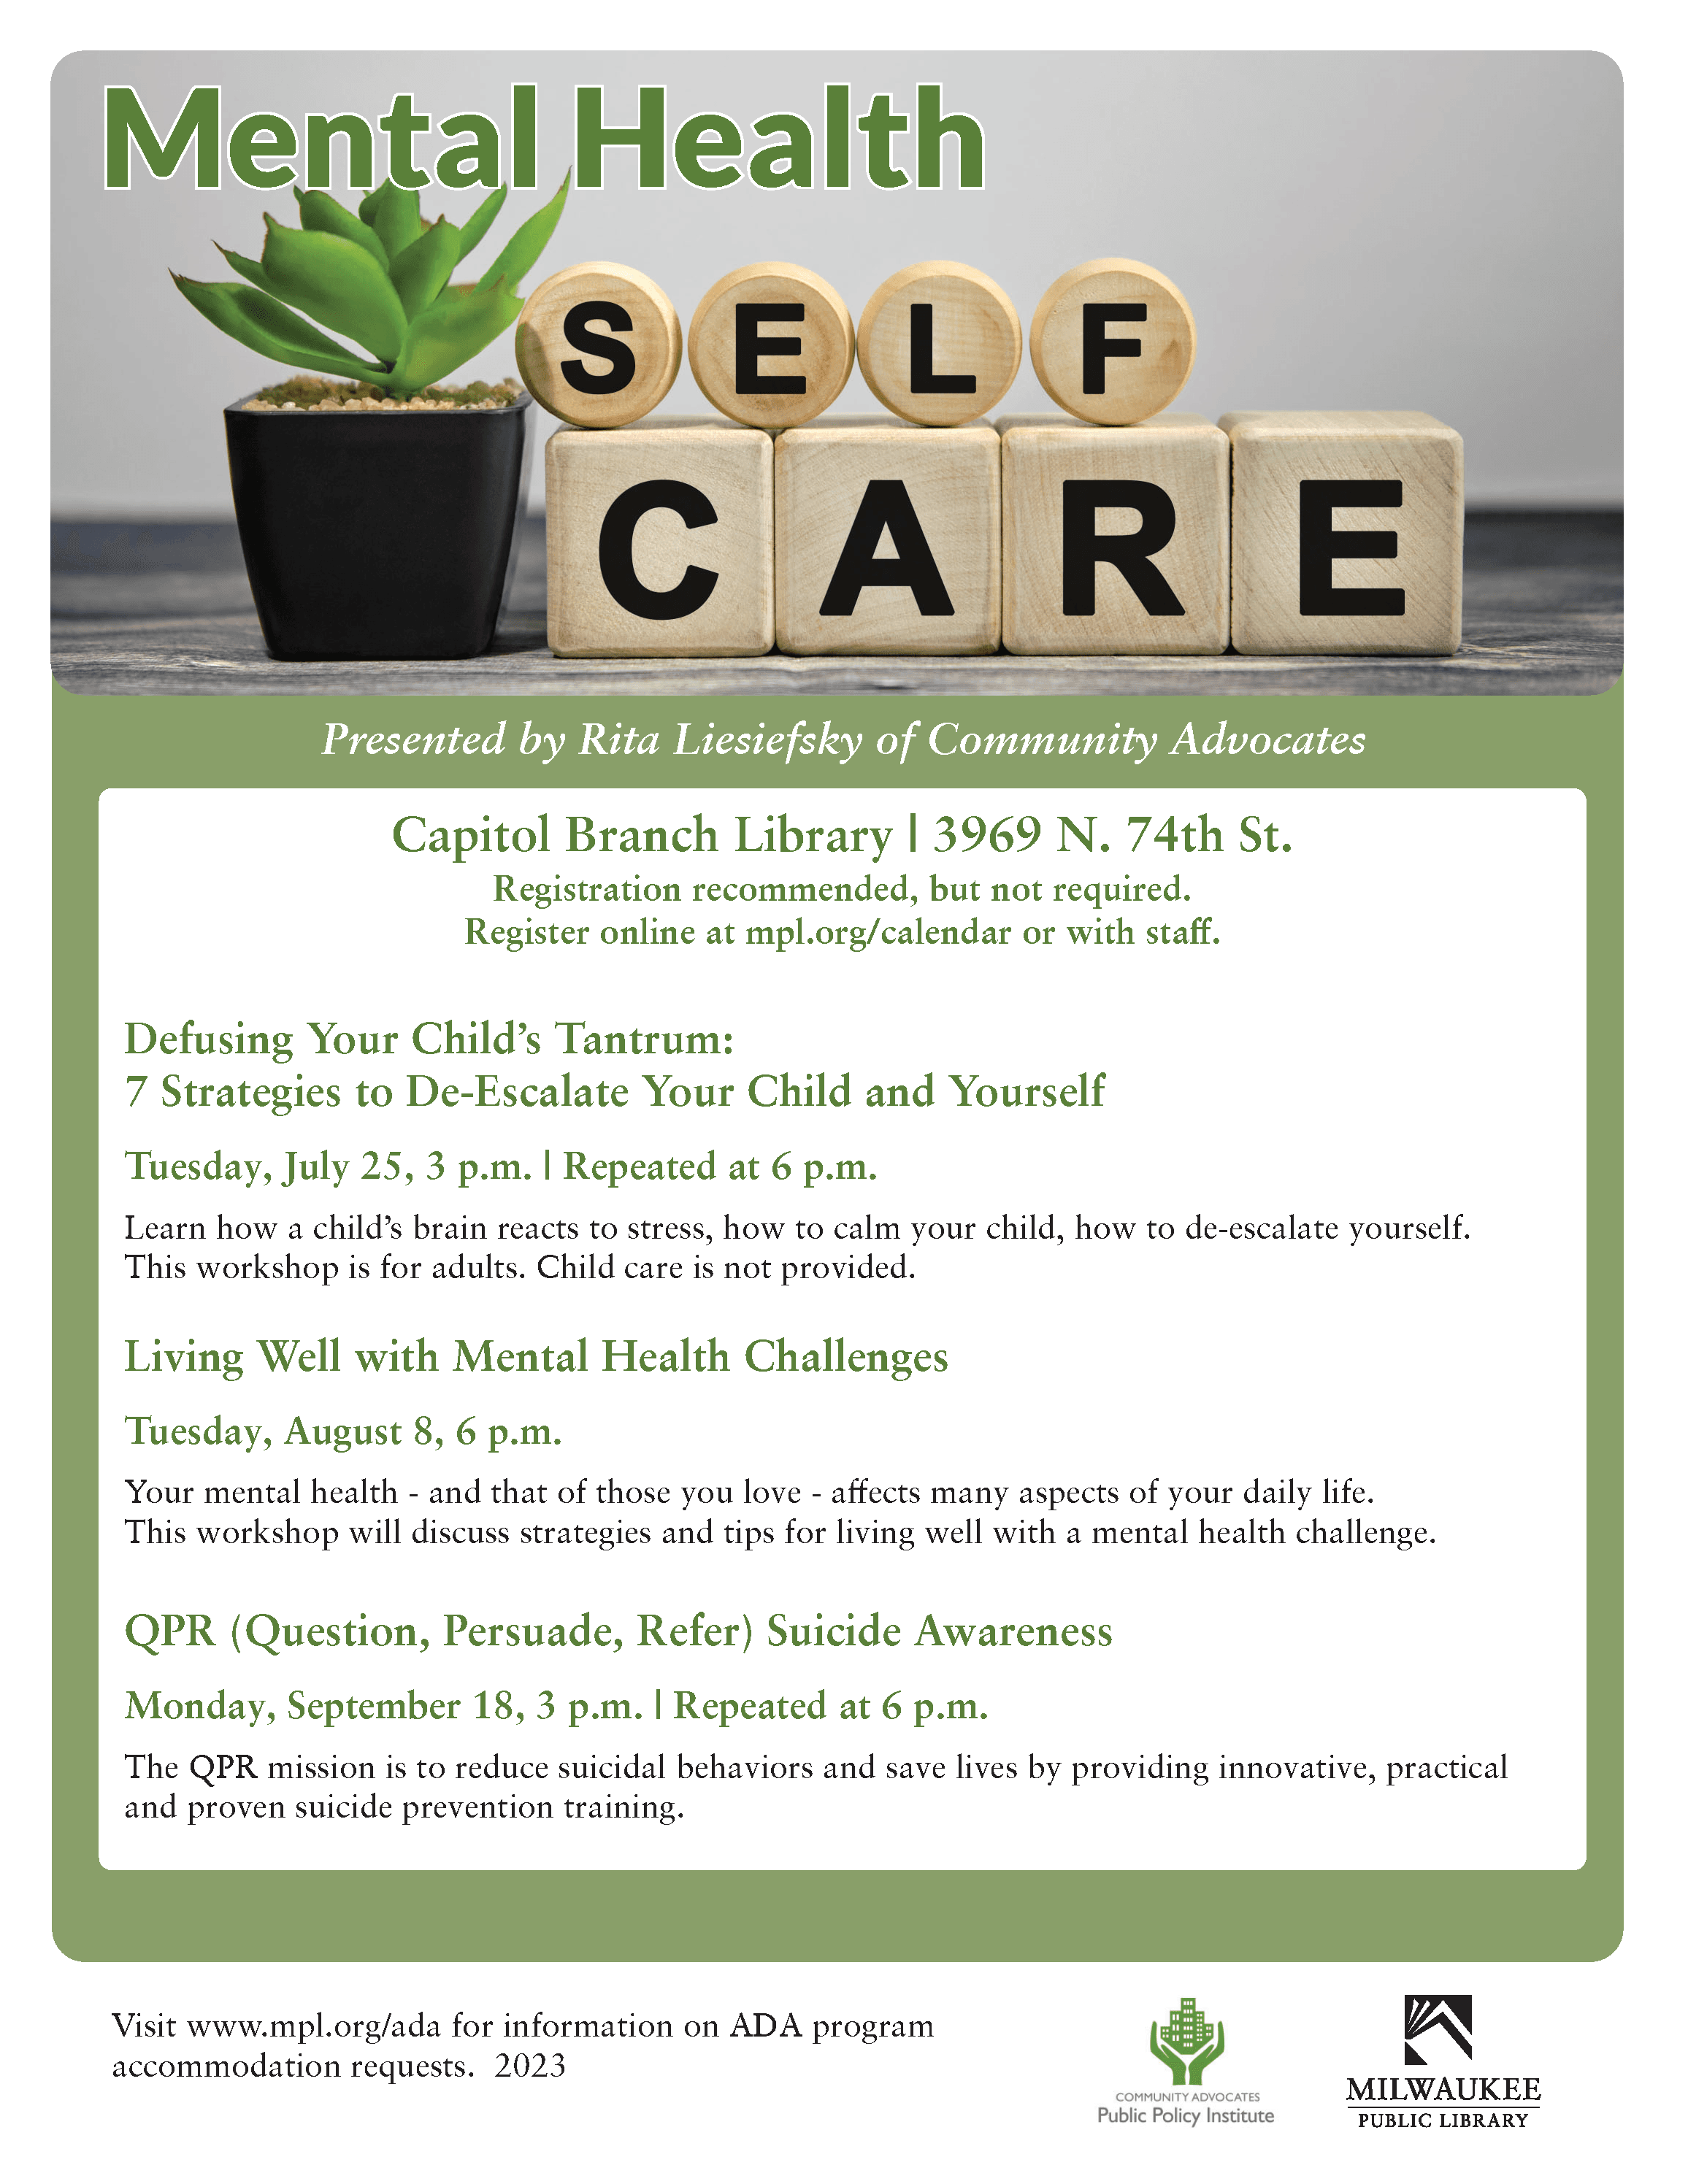 mental health self care sessions at MPL Capitol Branch